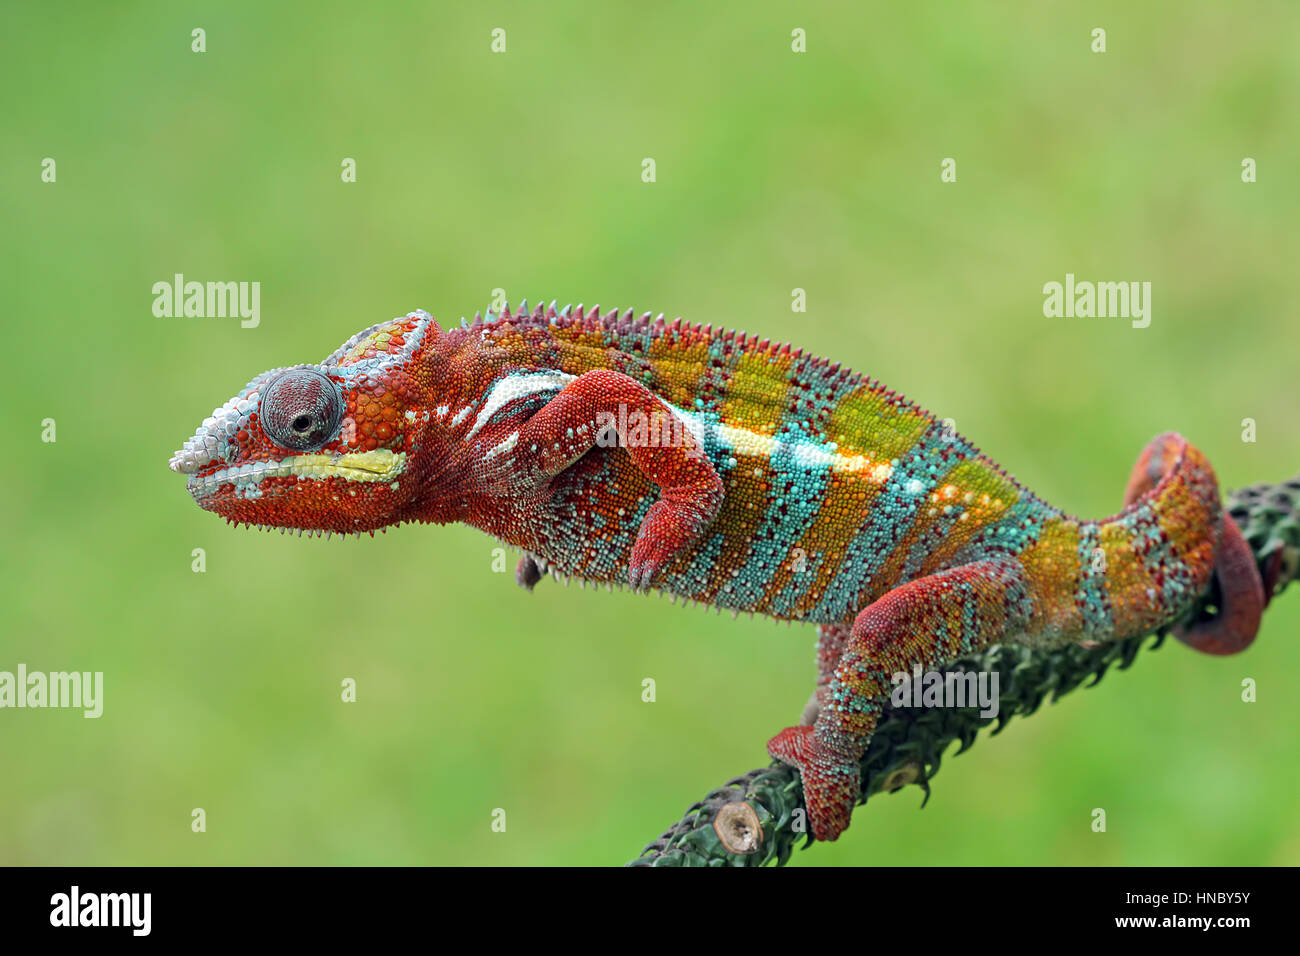 Panther Chameleon on a plant, Indonesia Stock Photo